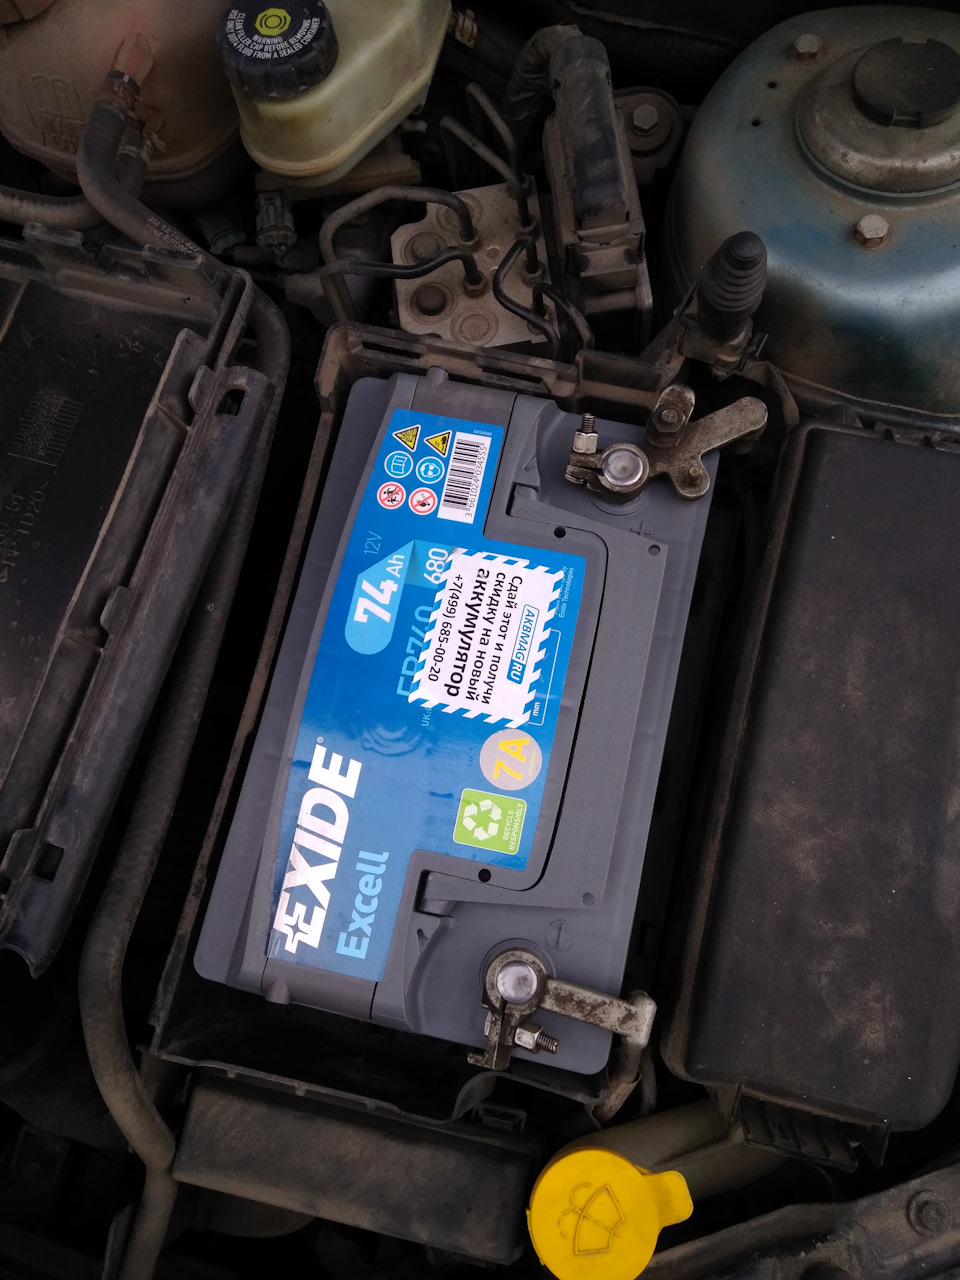 Saab battery replacement